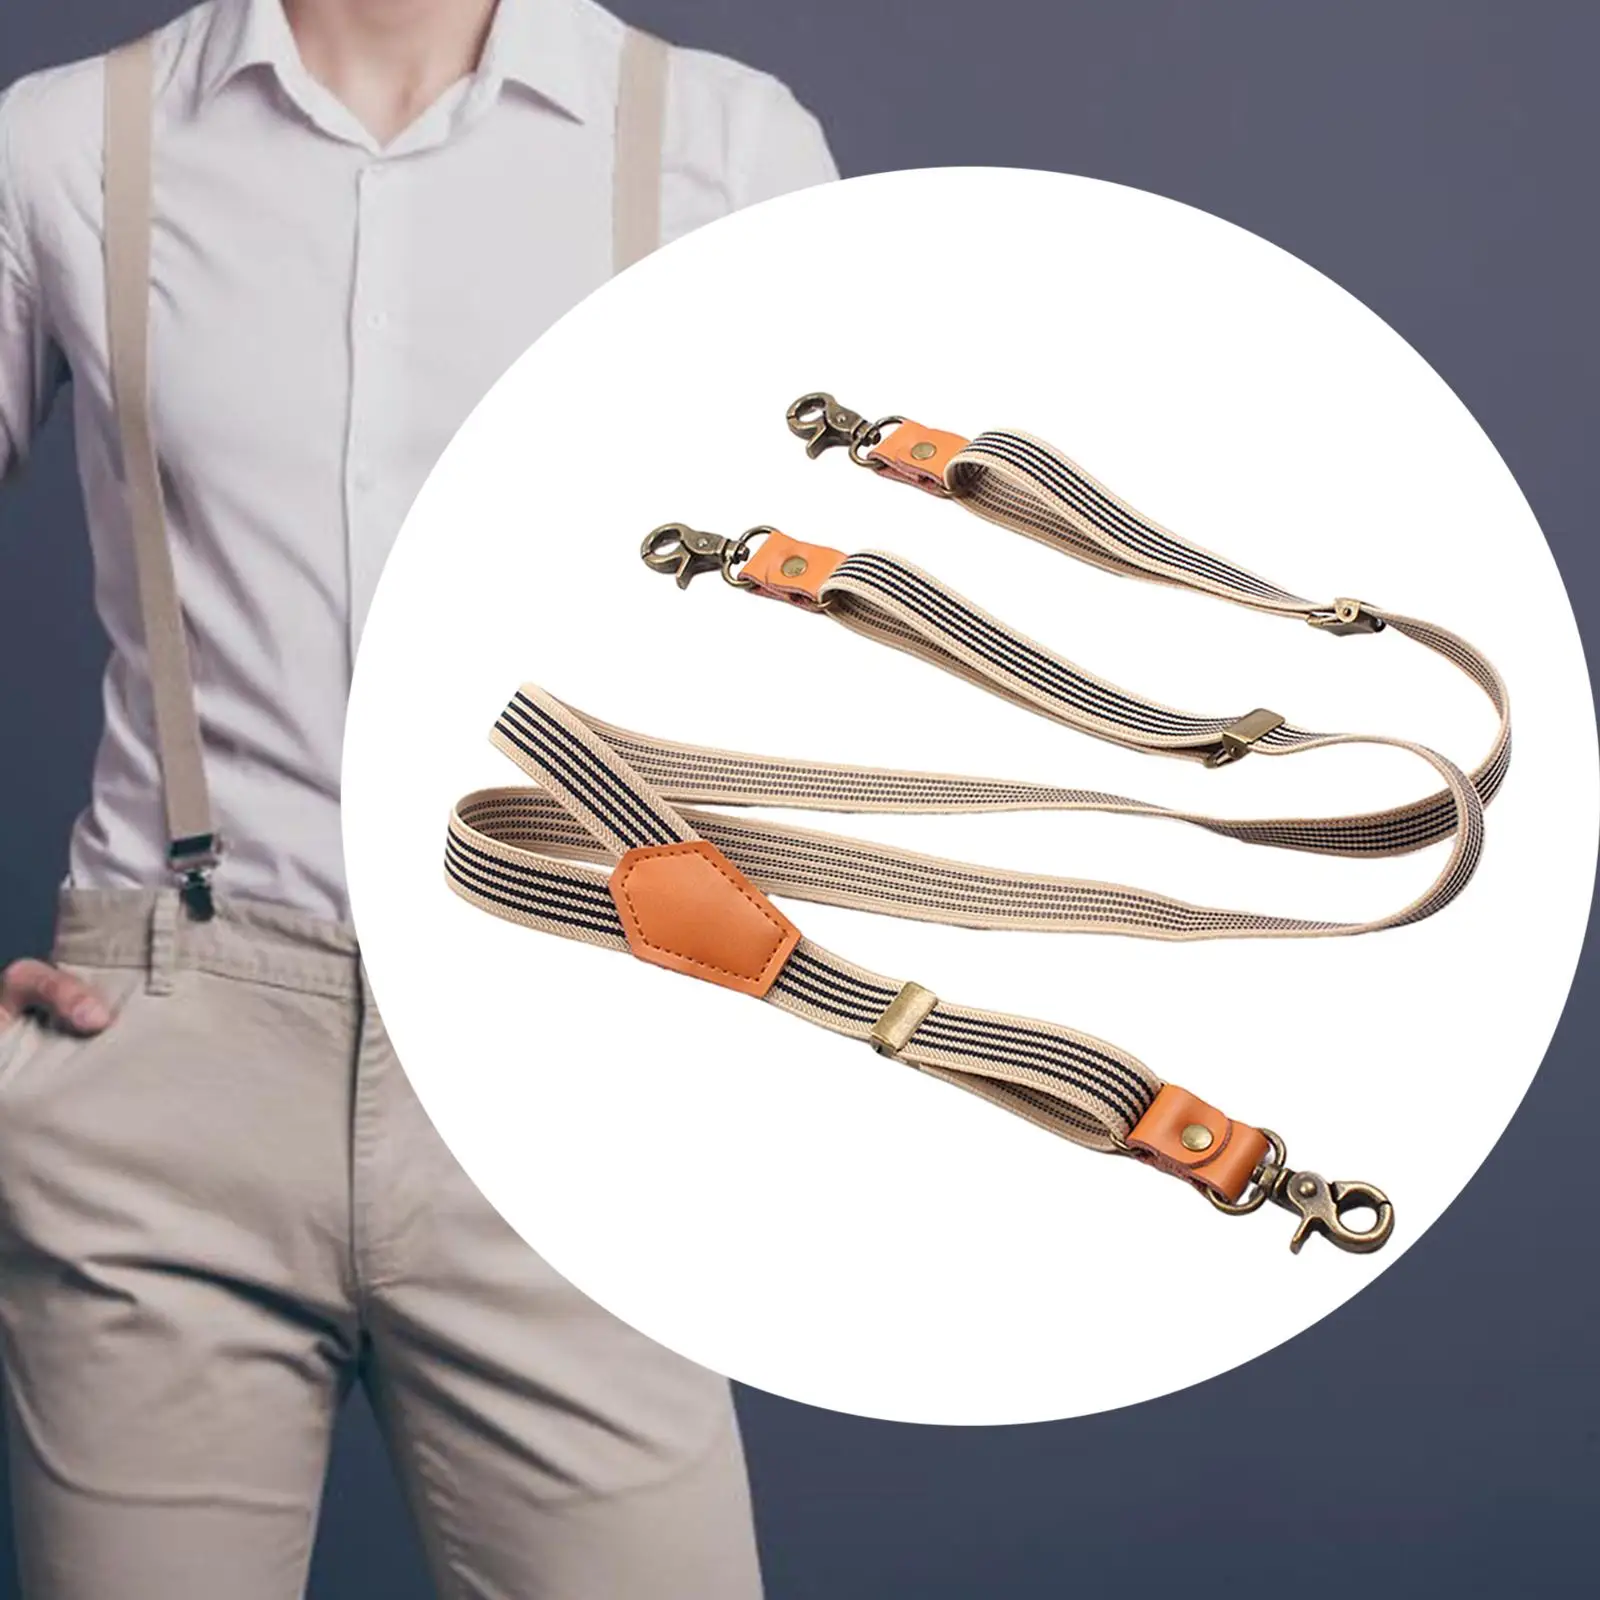 Suspenders for Men Casual Elastic Straps Y Shaped Adjustable Heavy Duty with Swivel Hooks Braces Belt Loops Mens Womens for Work